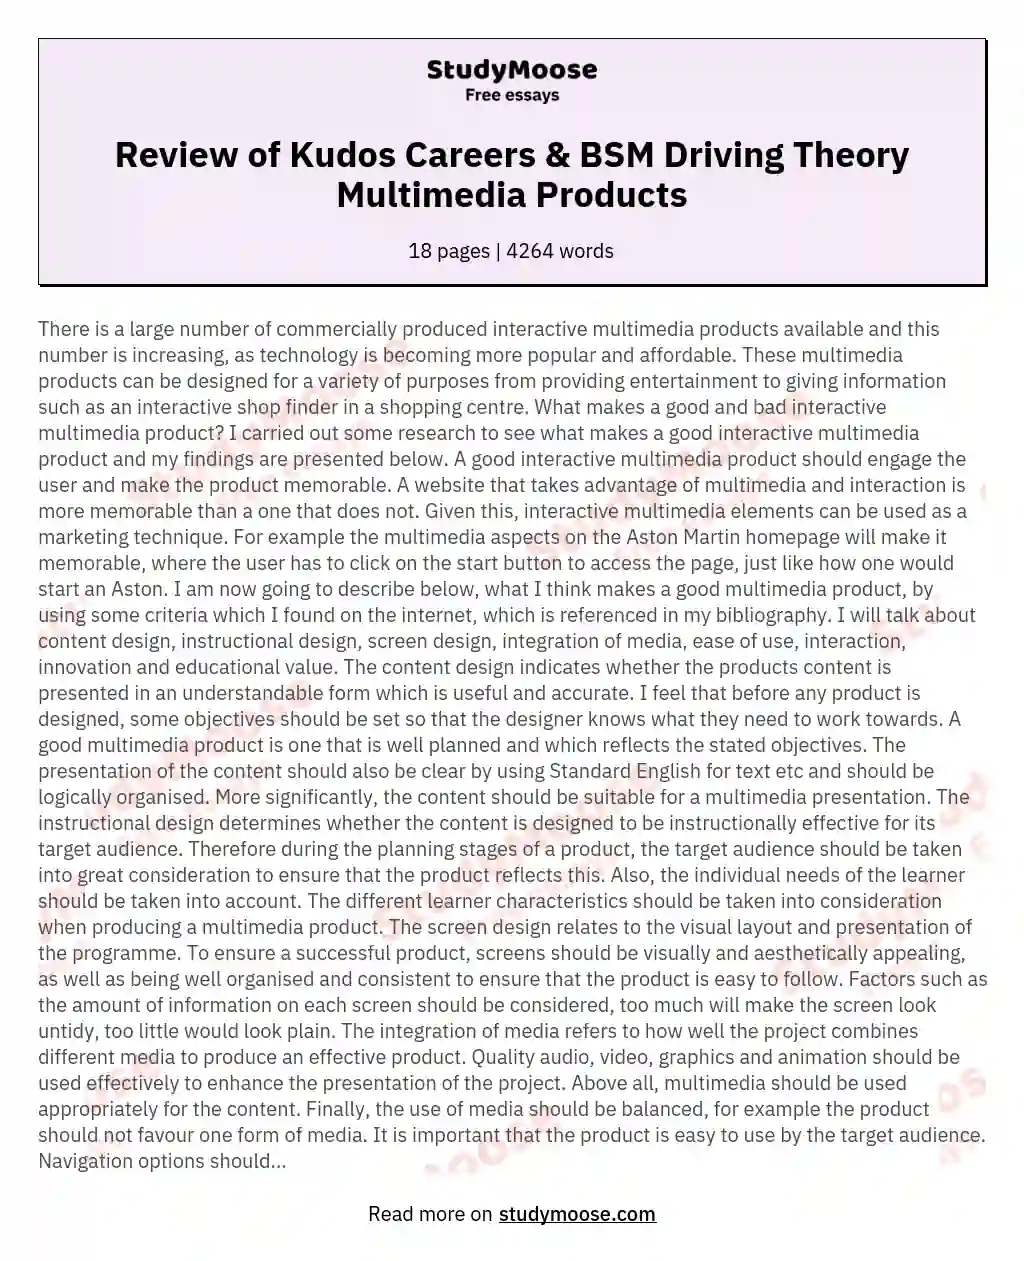 Review of Kudos Careers & BSM Driving Theory Multimedia Products essay